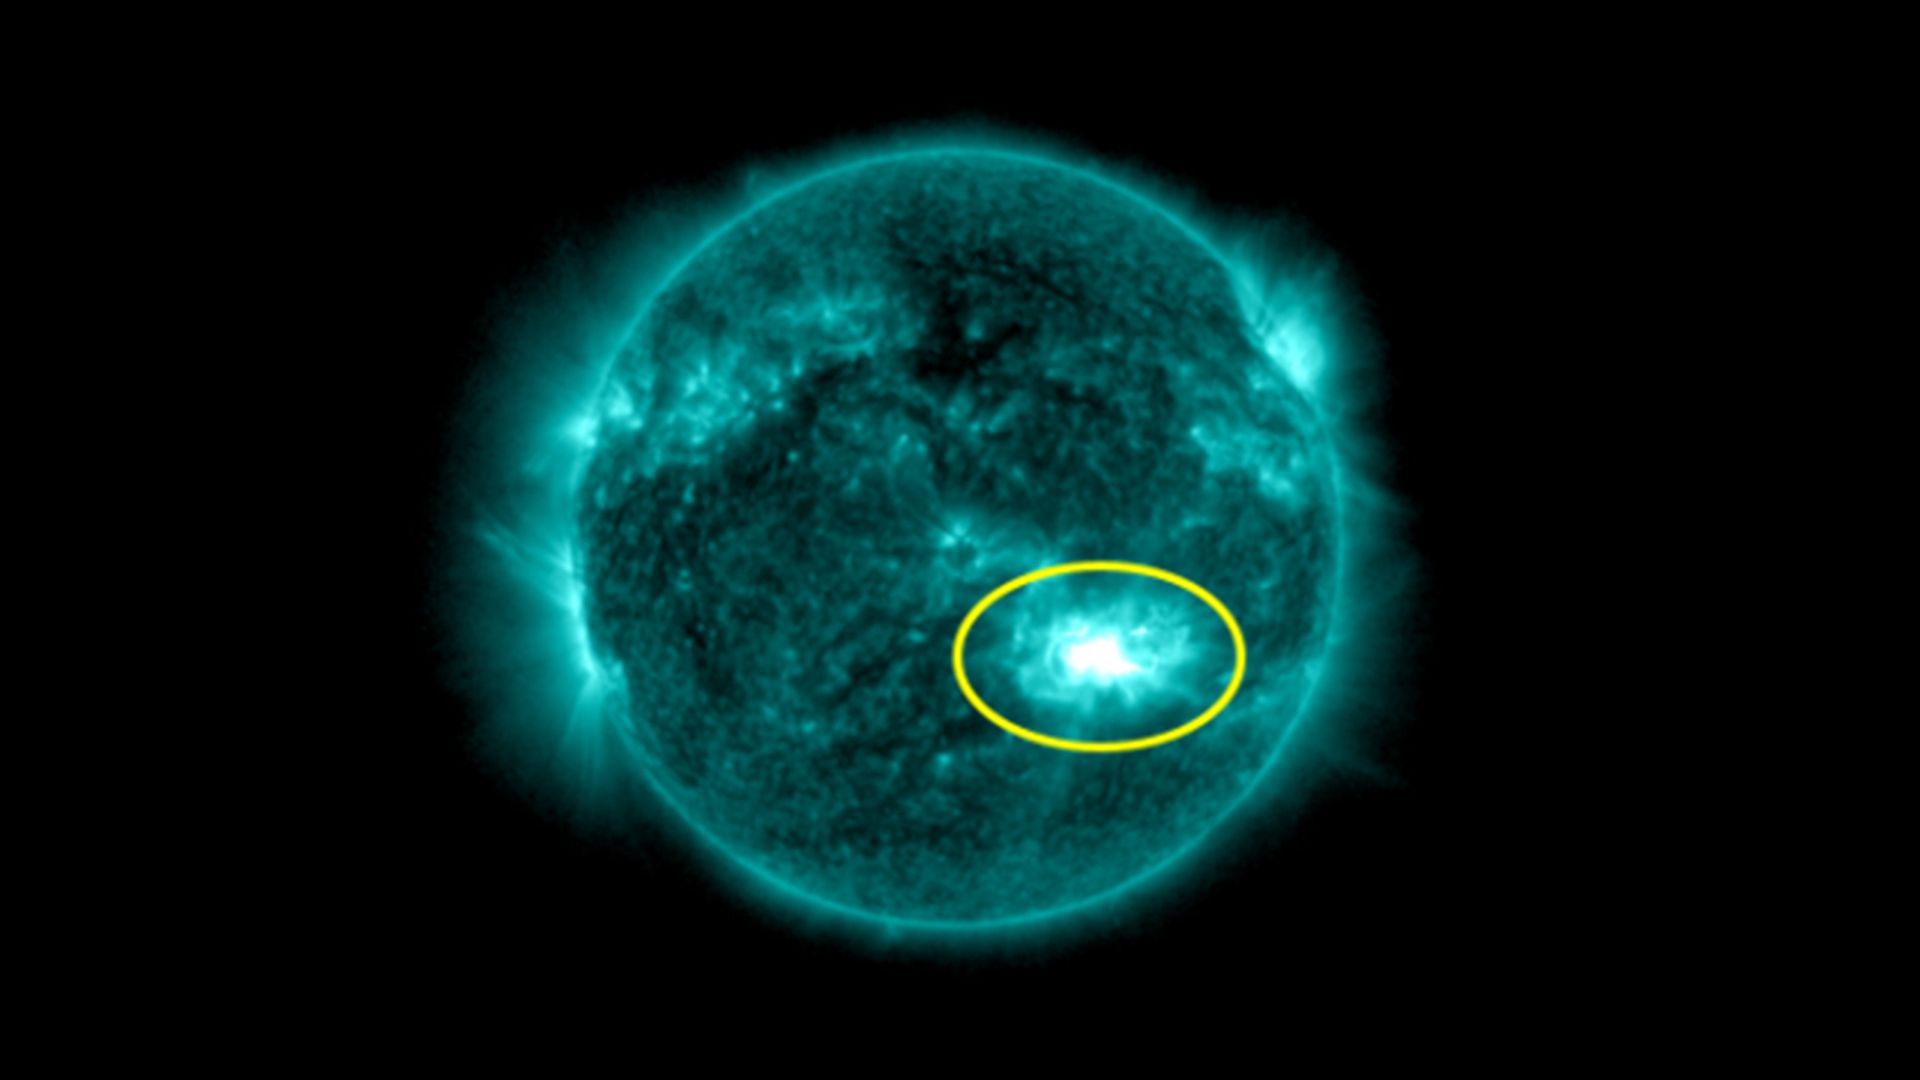 An image of a solar flare from the sun, circled by NASA.